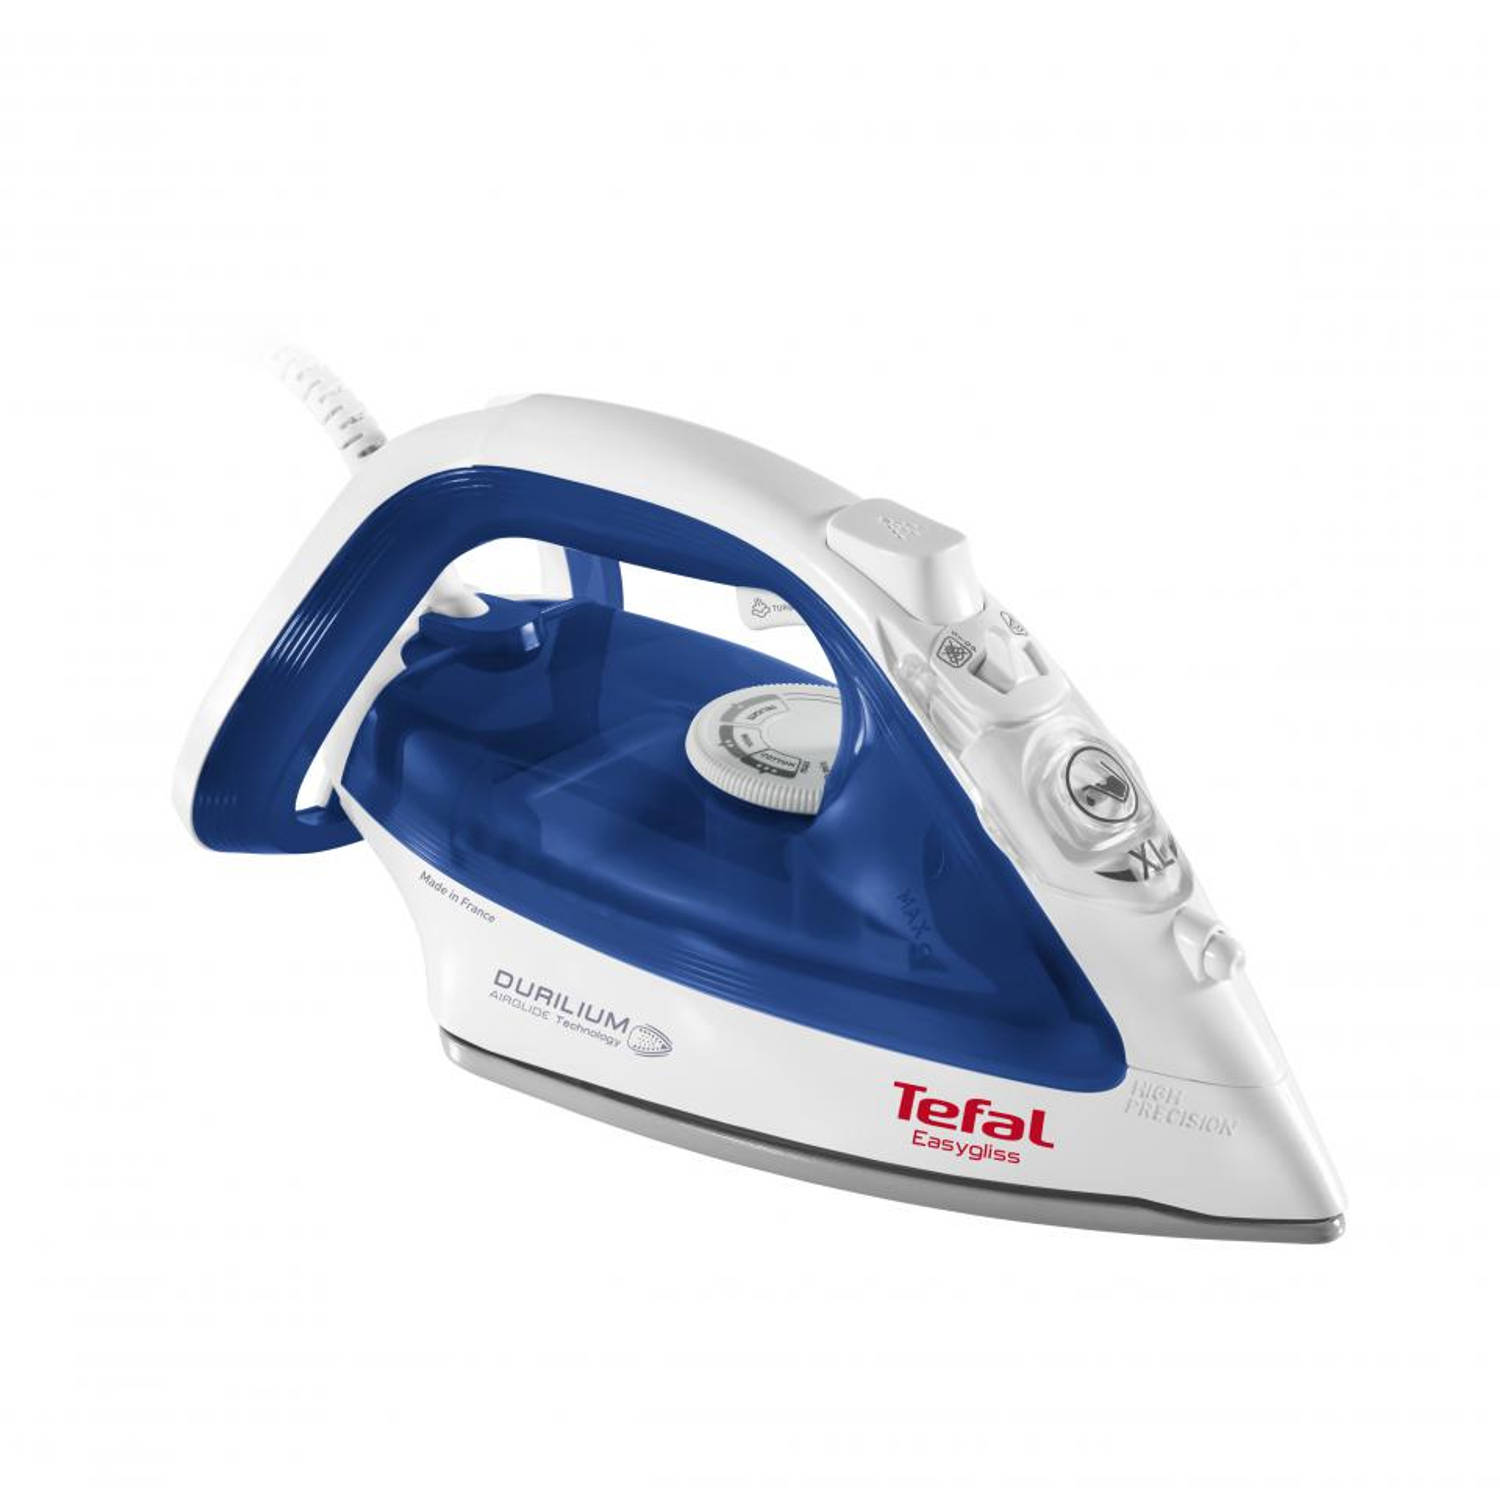 Tefal EasyGliss FV3960 - Durilium Airglide strijkzool - 2400W - 140 g/min stoomstoot - 35 g/min continue stoomafgifte - Druppelstop - Made in France